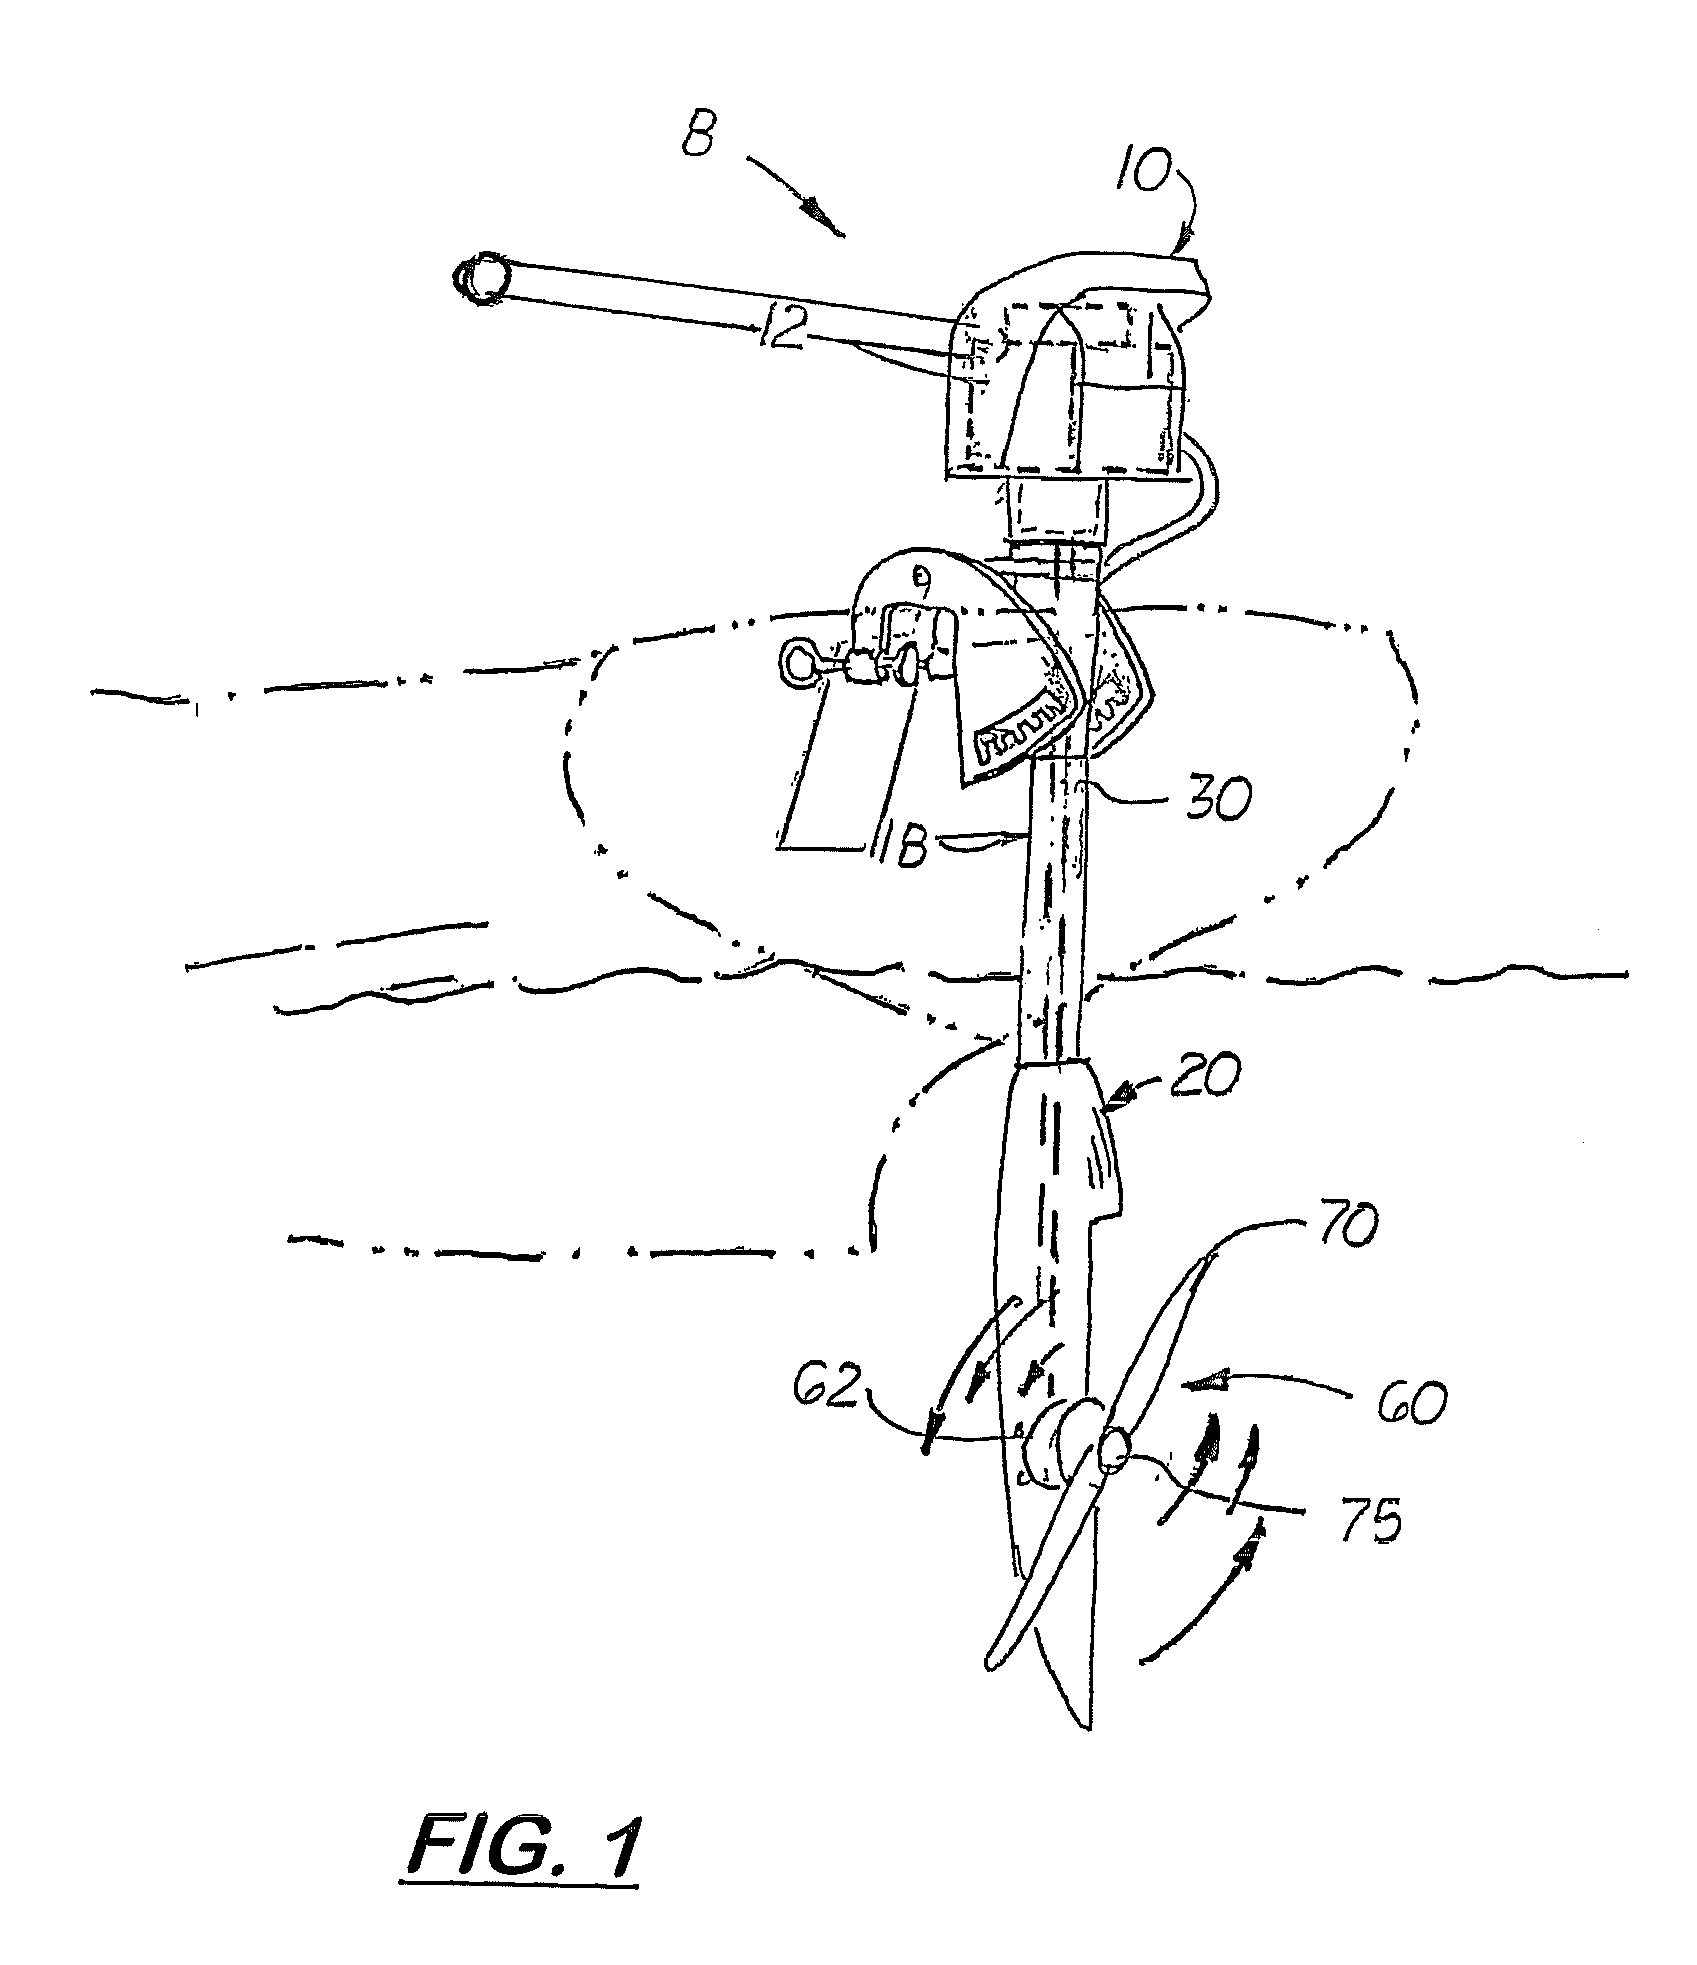 Activation and deactivation assembly for an electric outboard motor